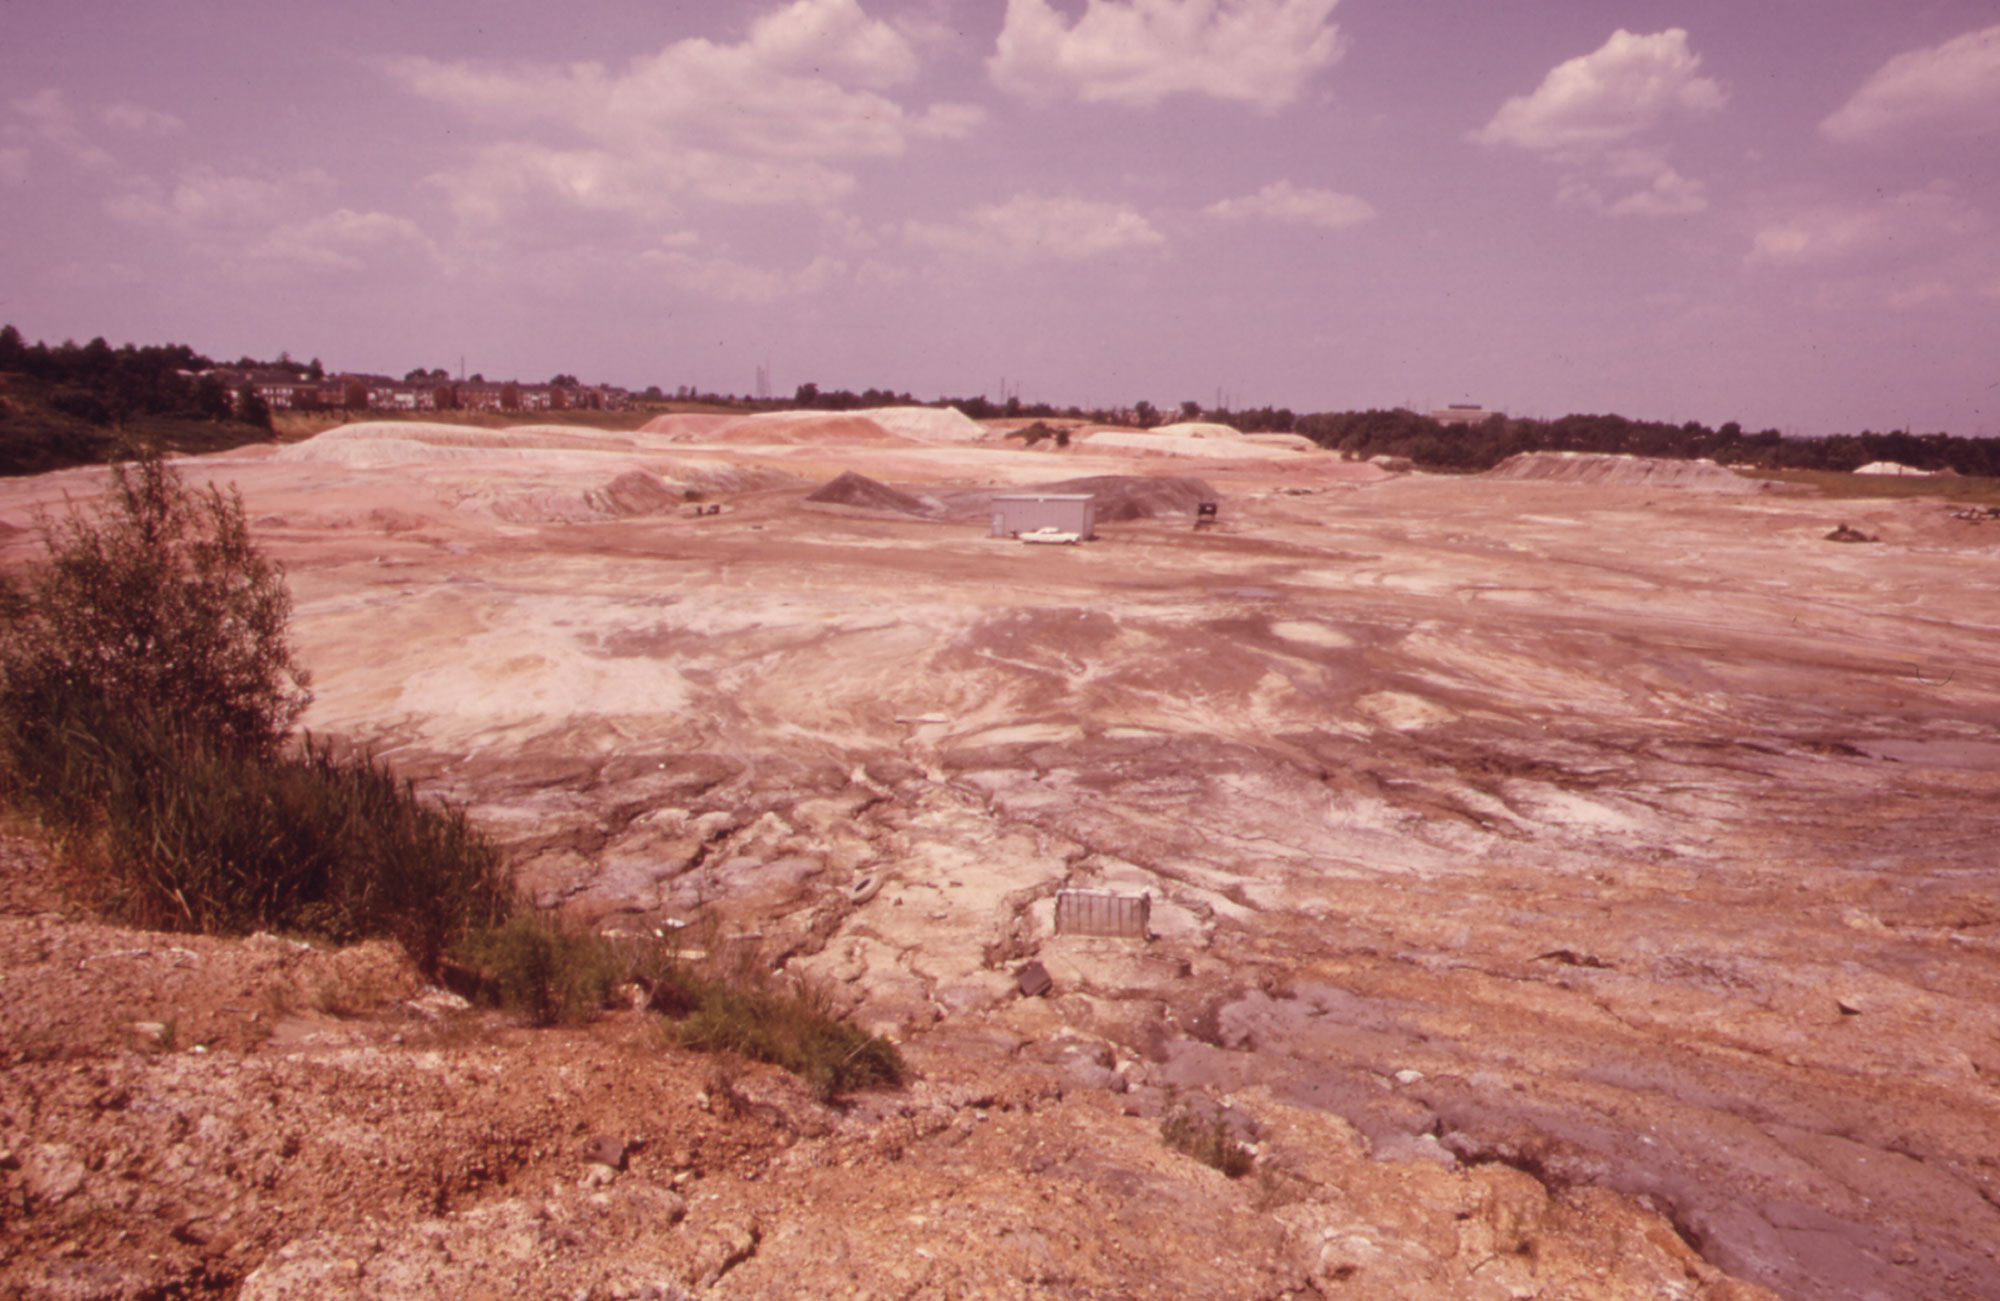 Photograph of a clay pit in Woodbridge, New Jersey, taken in 1973. The photo shows a large, mostly flat expanse of exposed clay with plants and buildings around the edges.